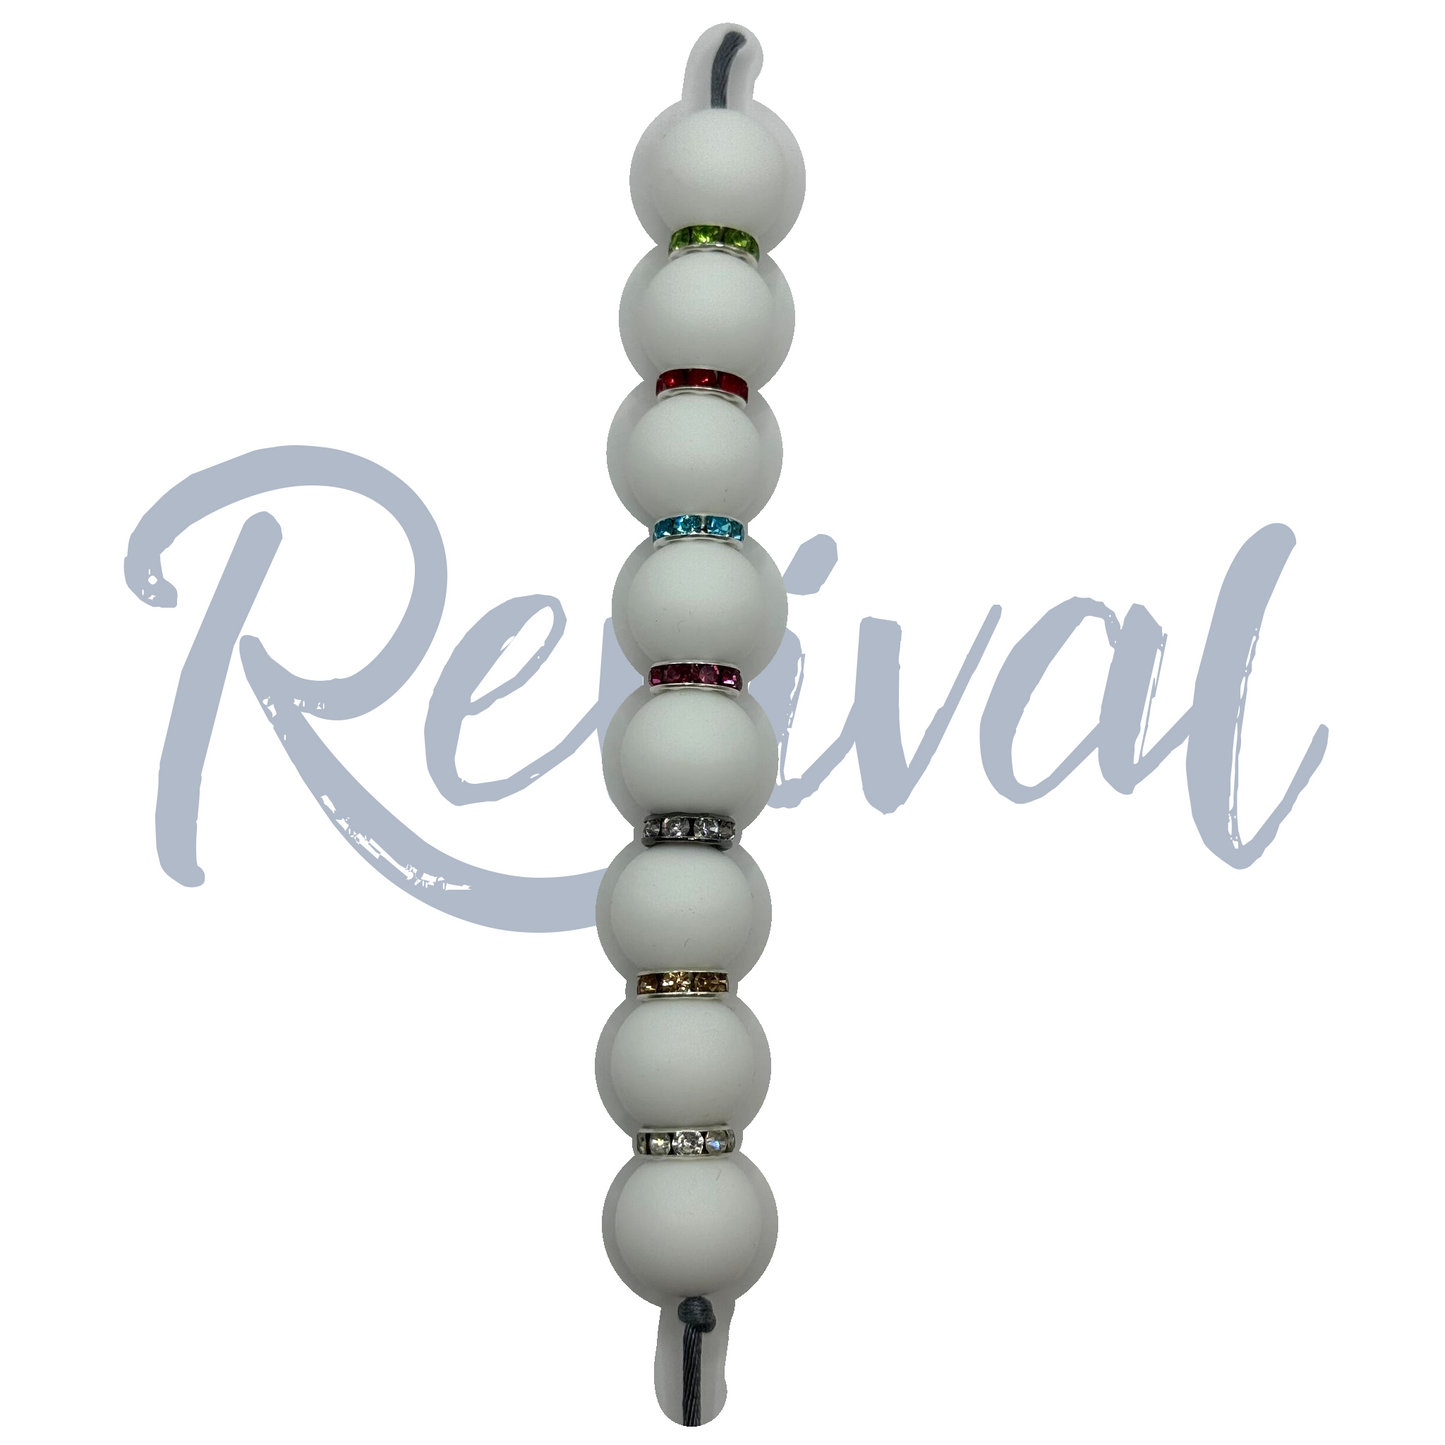 Custom Design Your Own Beaded Pen by Cr8tive Release Gifts